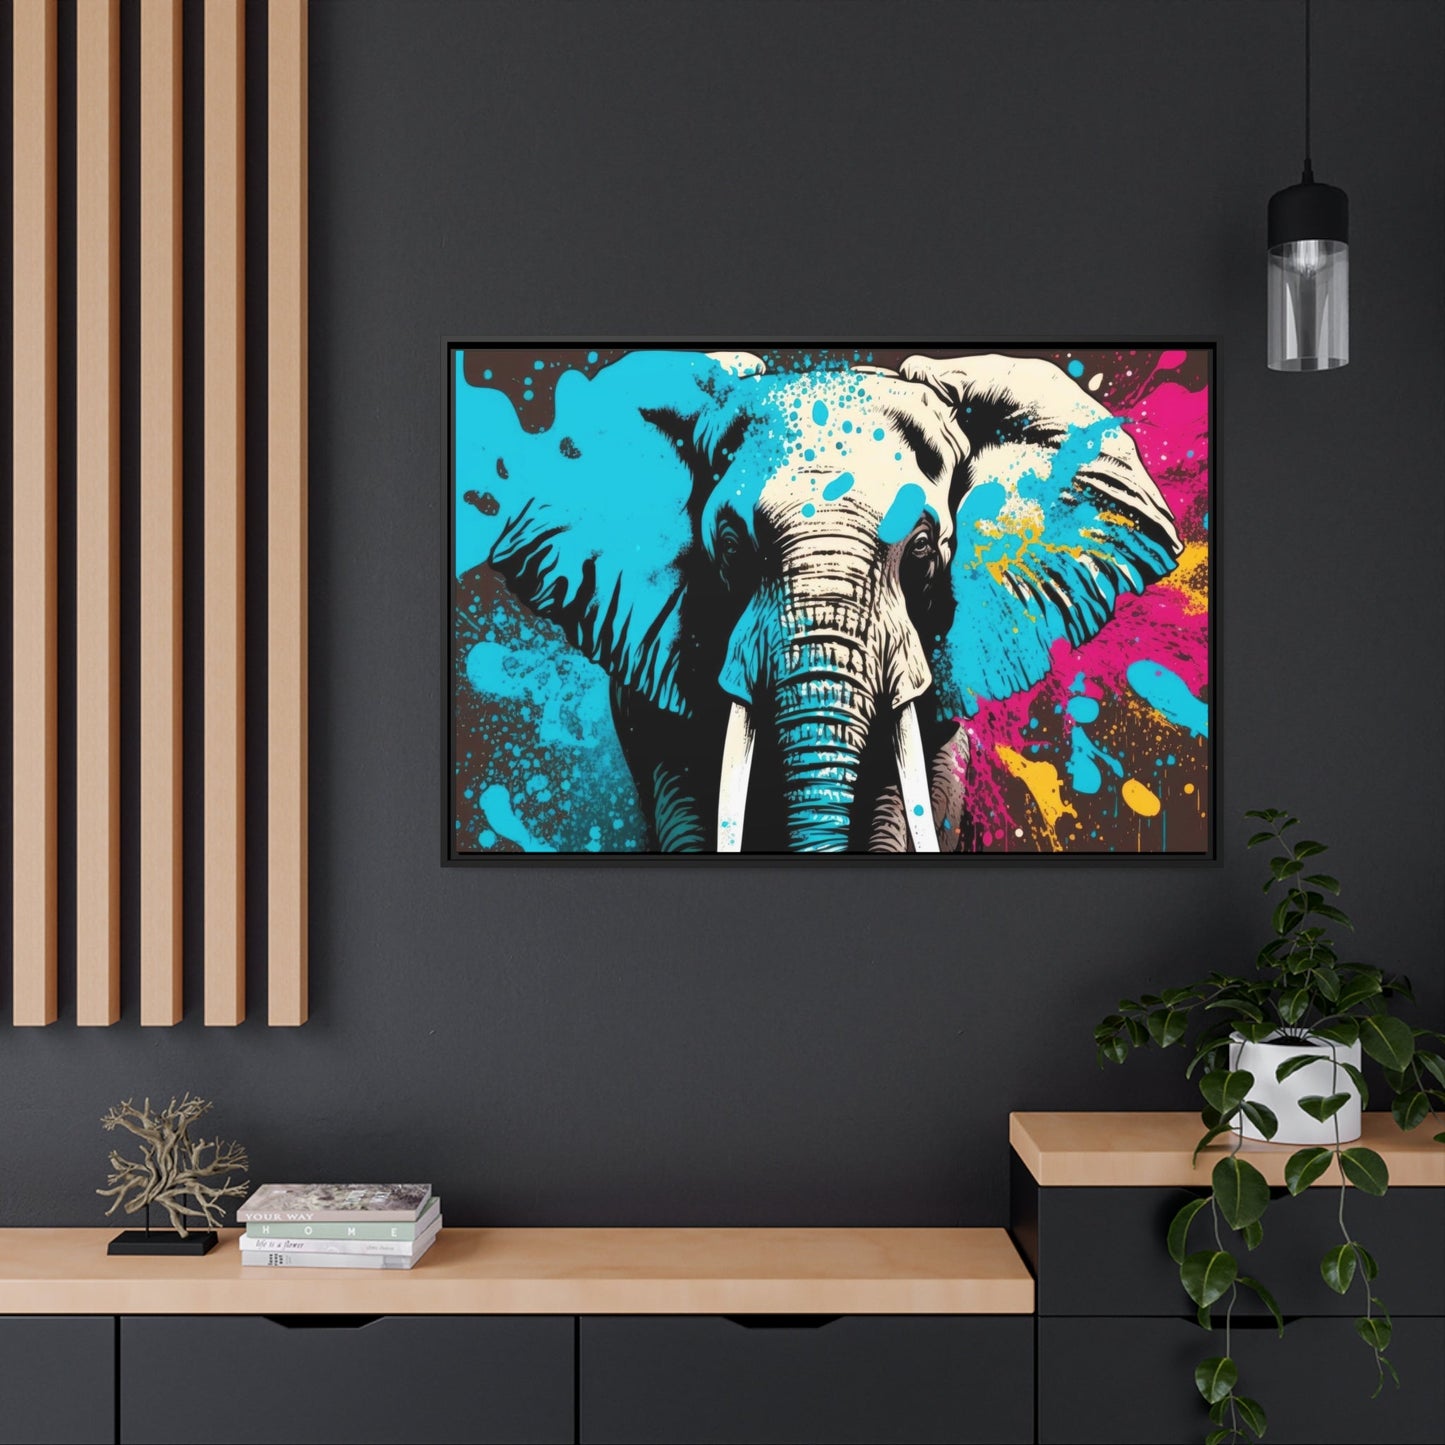 Gentle Giant: Natural Canvas Wall Art of Elephant